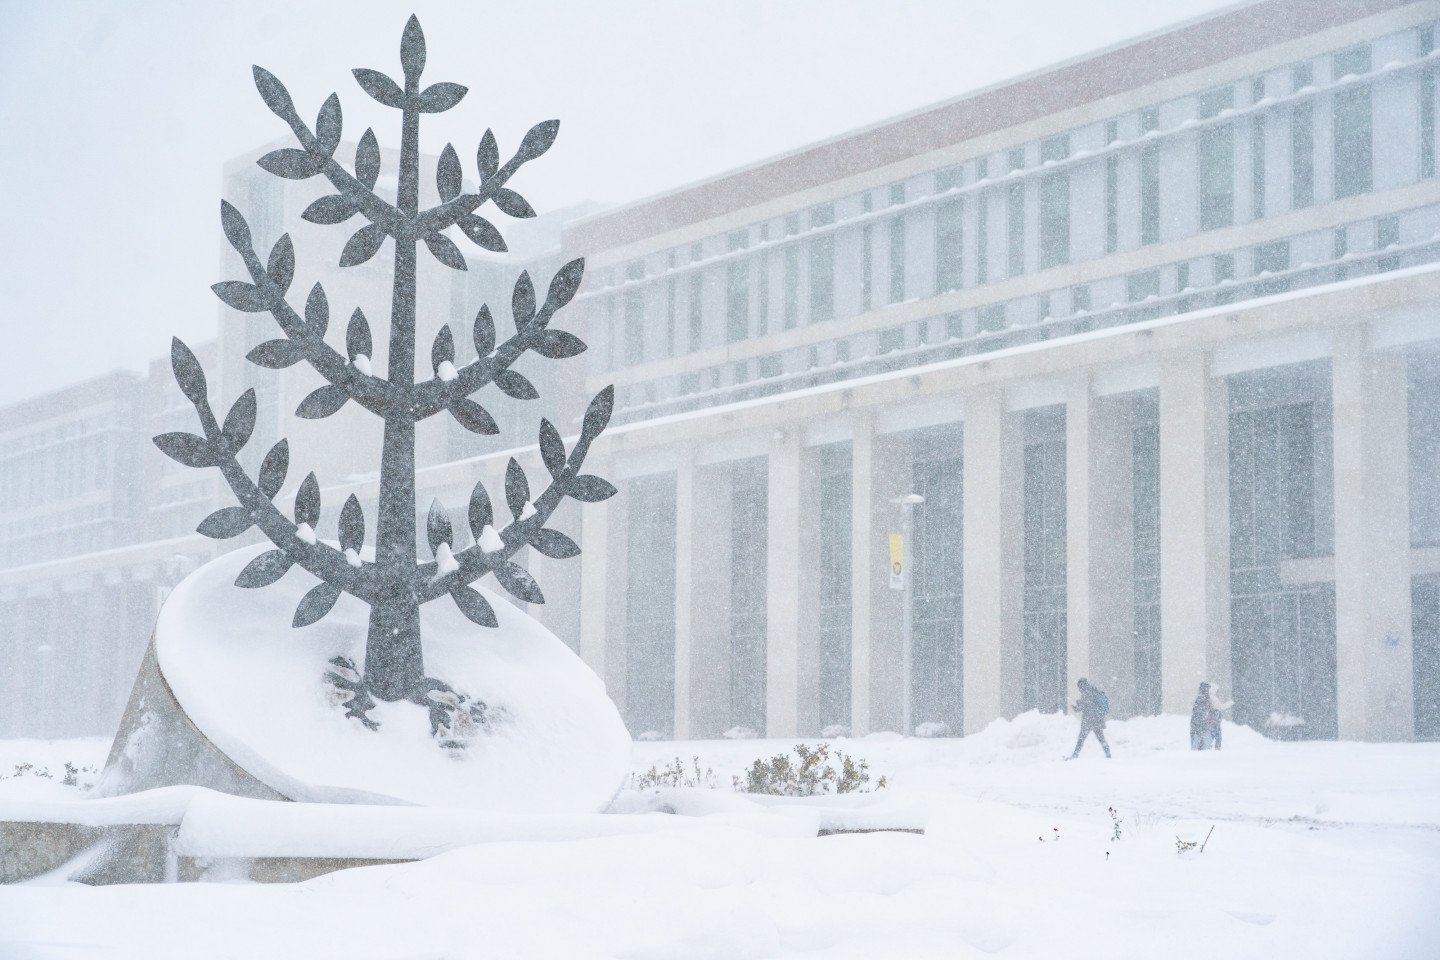 The WMU seal sculpture covered in snow.